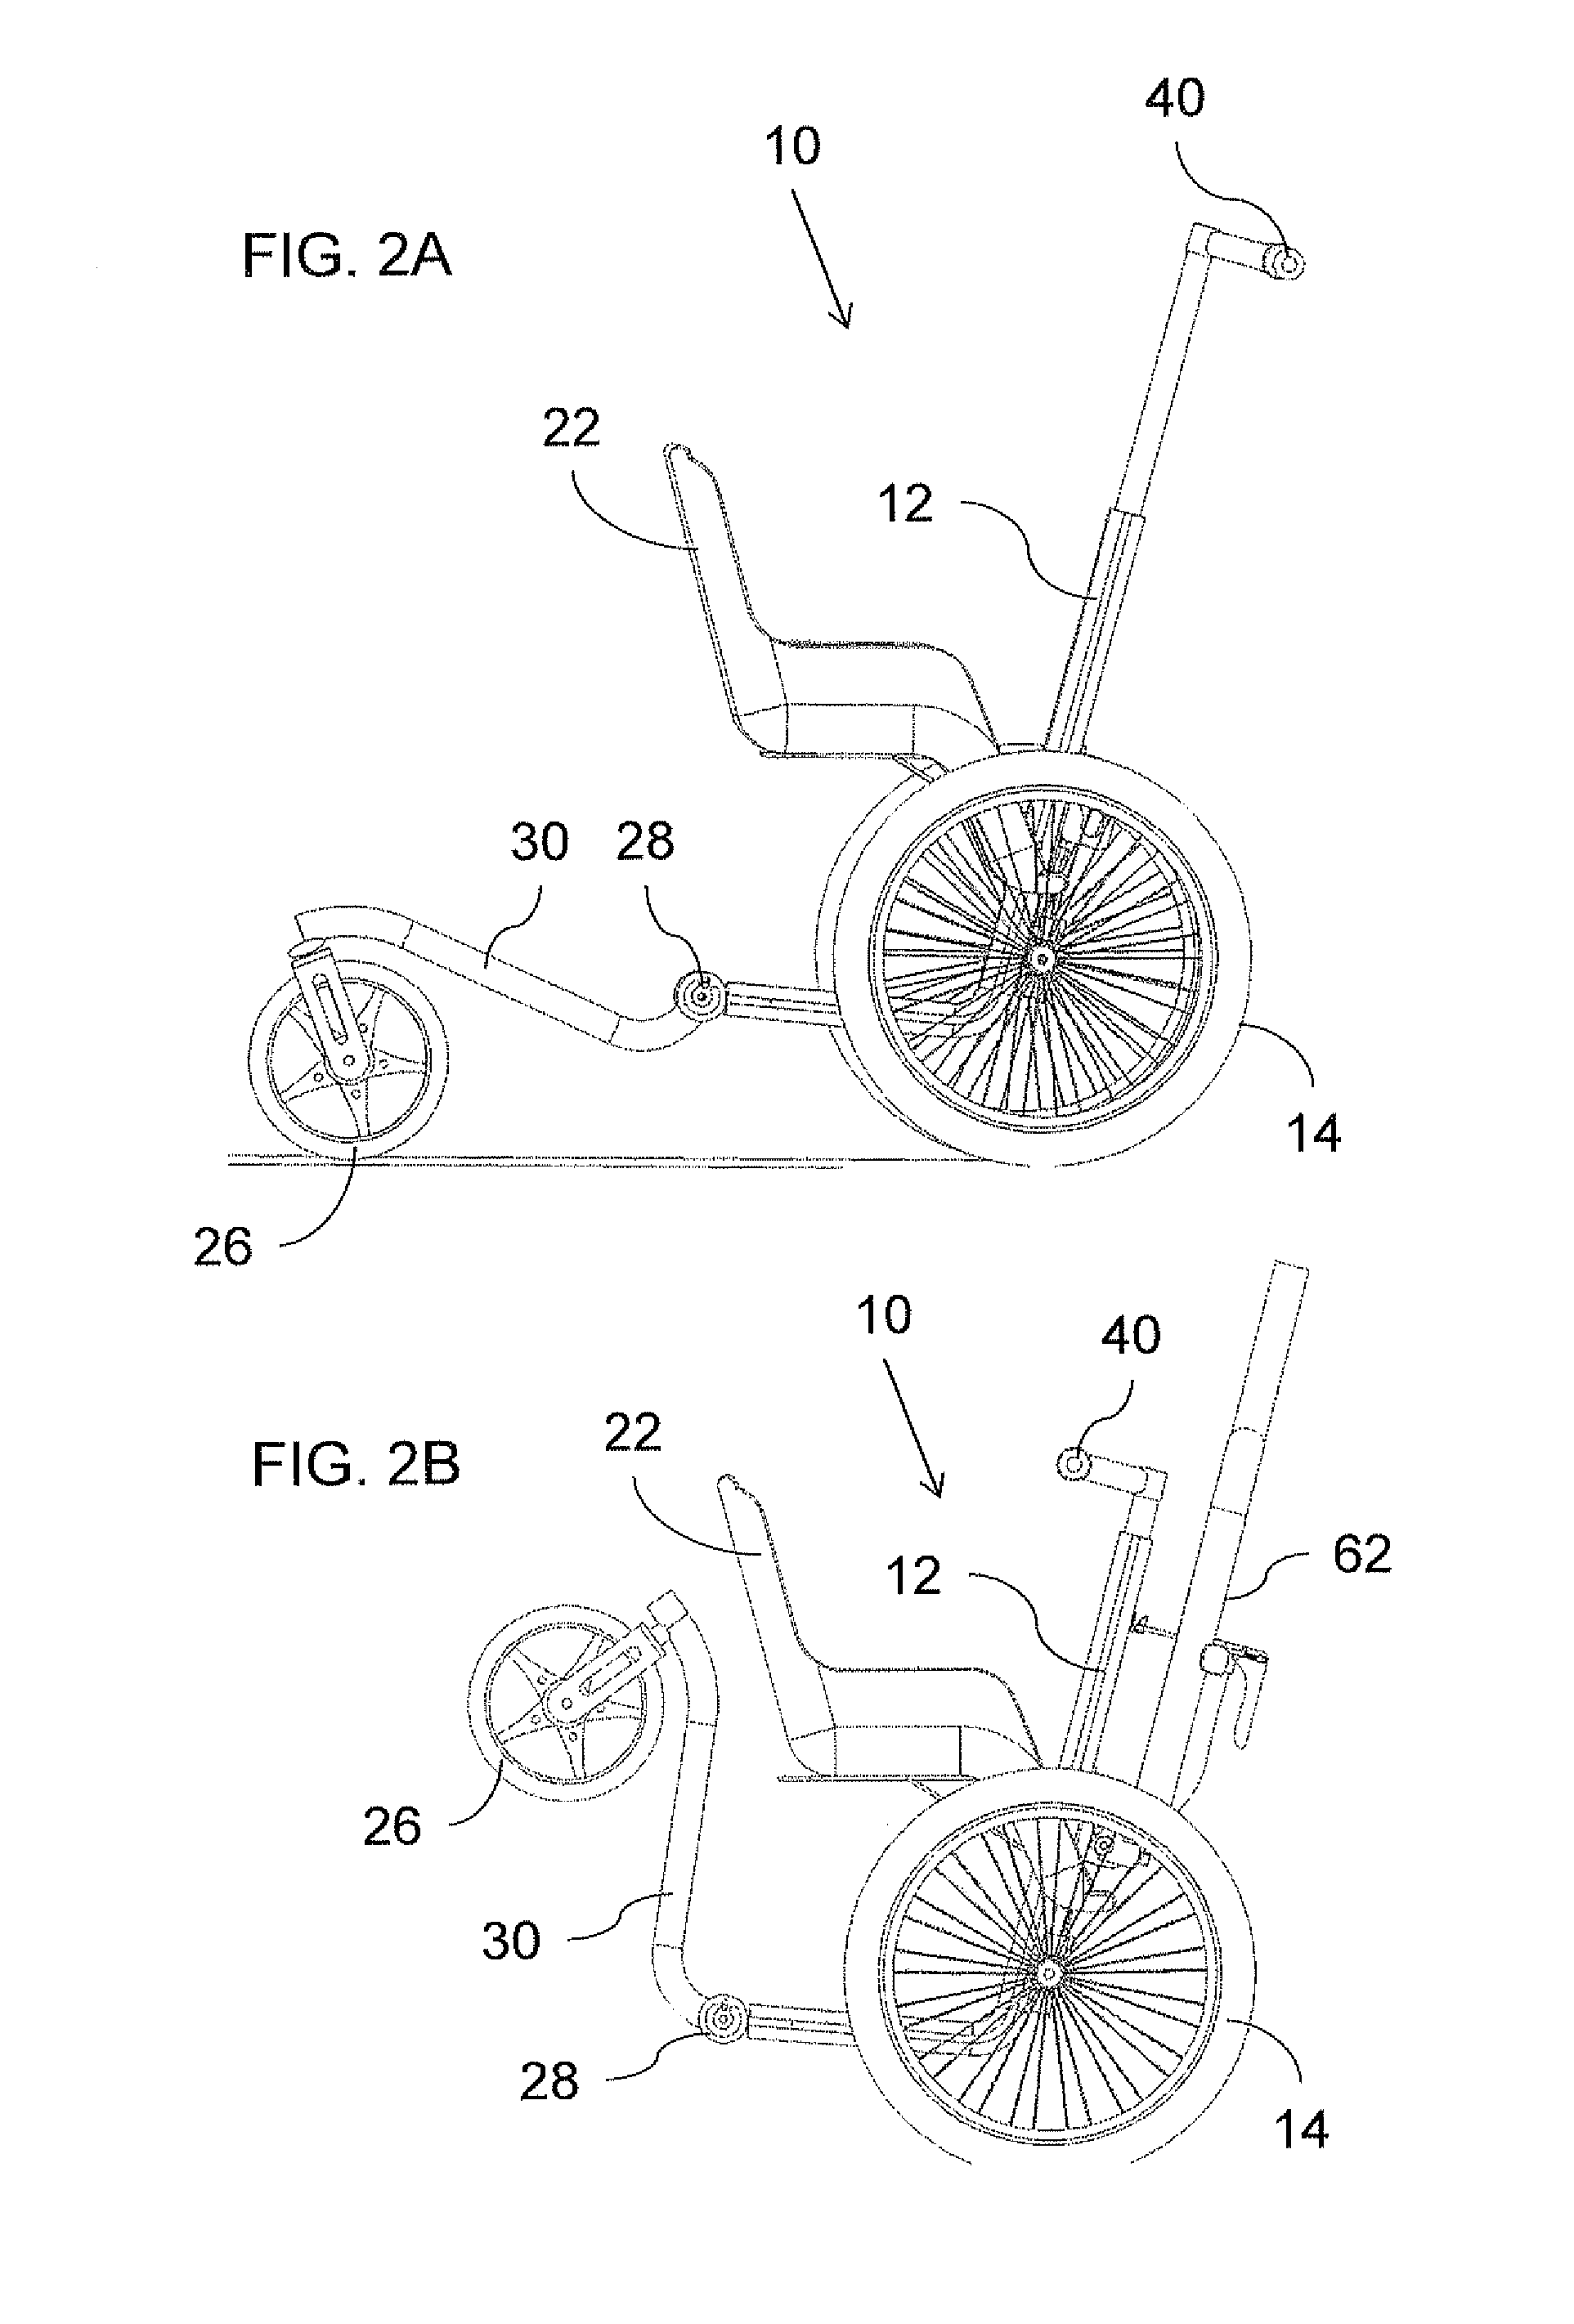 Cart for use with pedal-cycle or other tilt-cornering vehicle